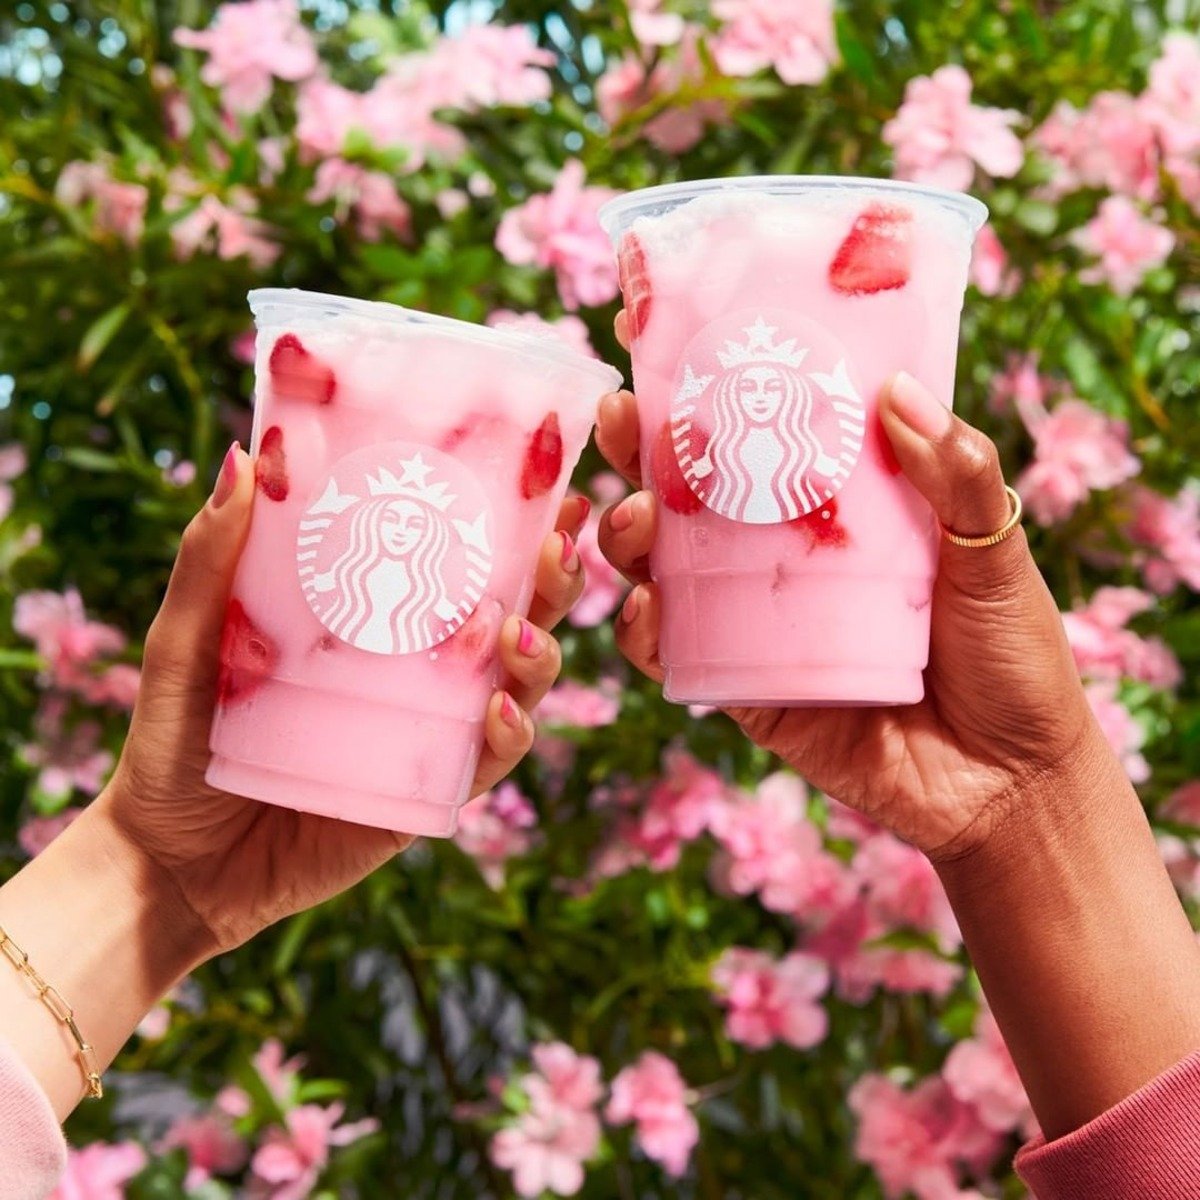 Starbucks Pink Drink: What It Is And How Much It Costs